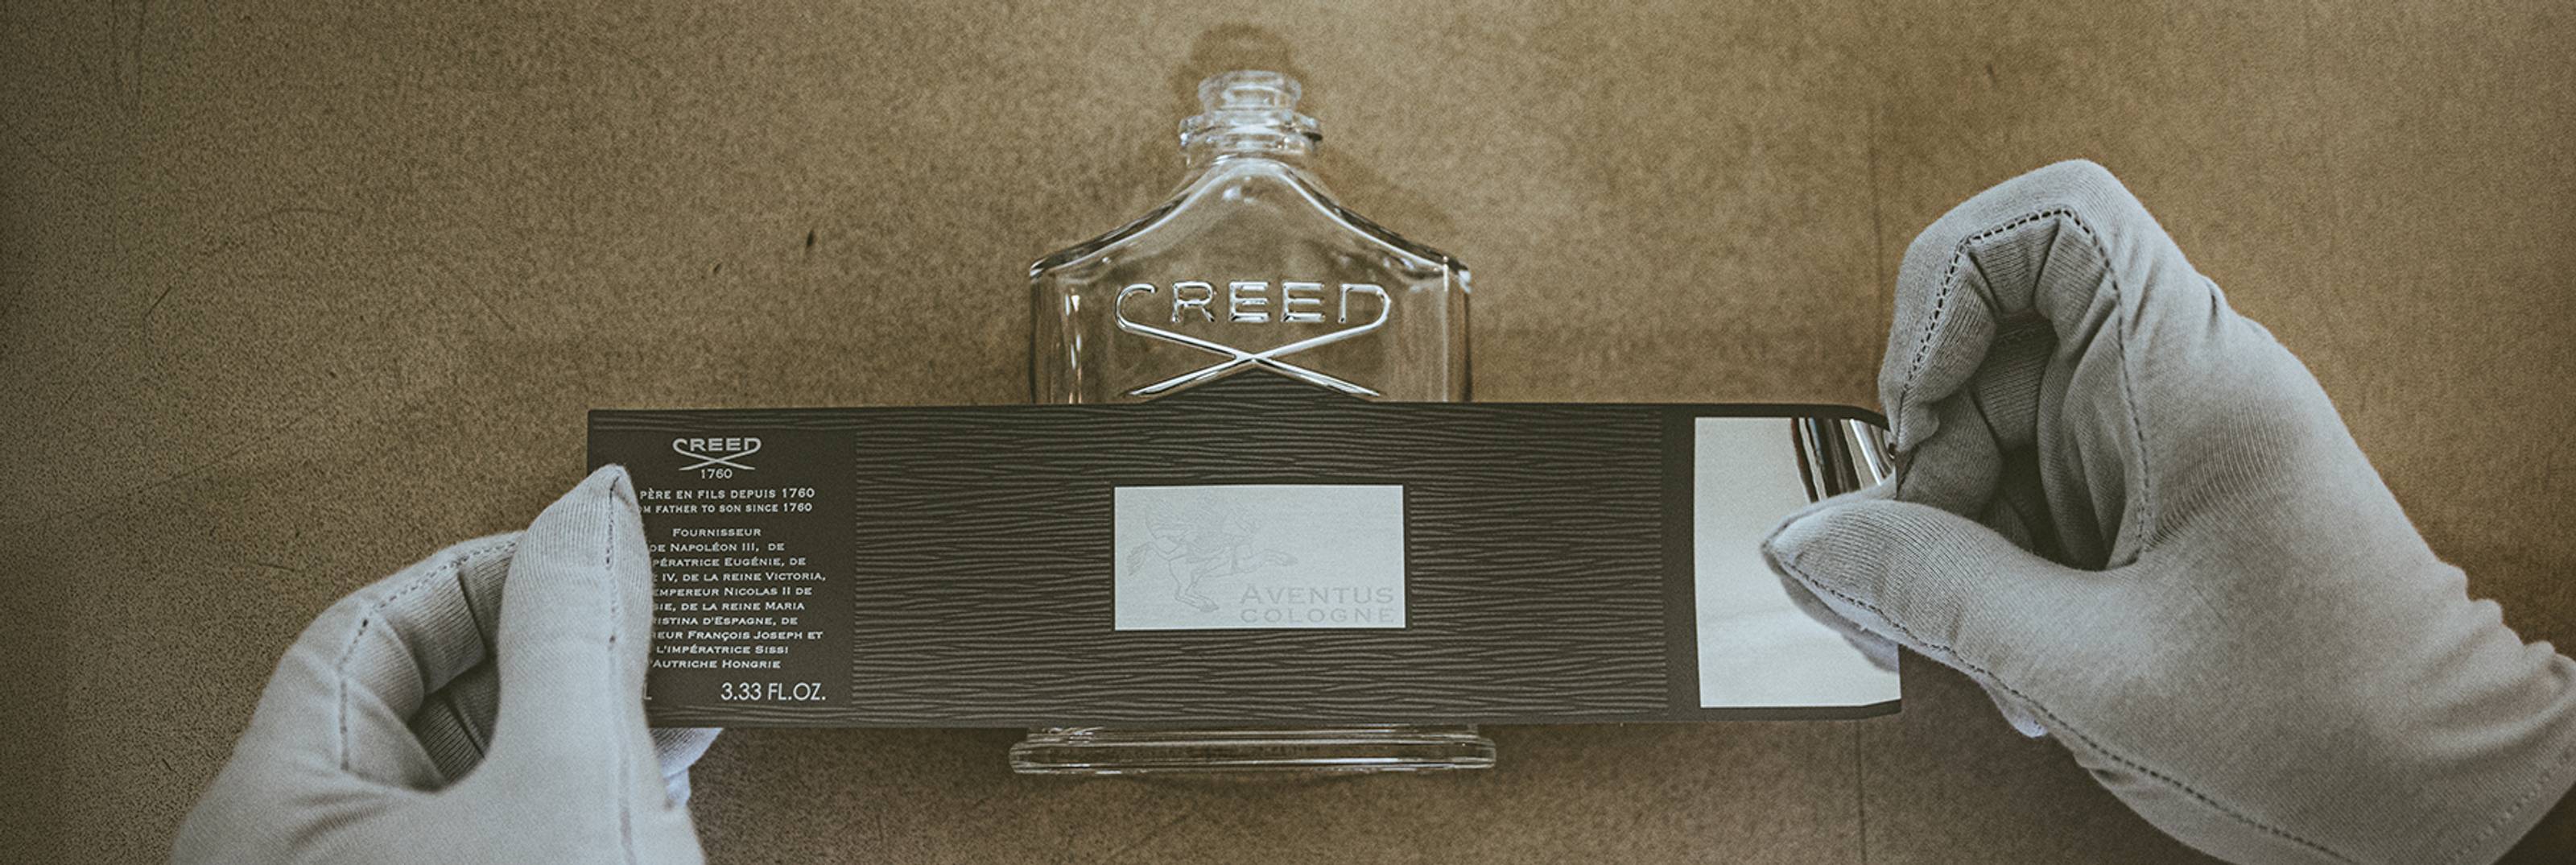 The Creed Concierge